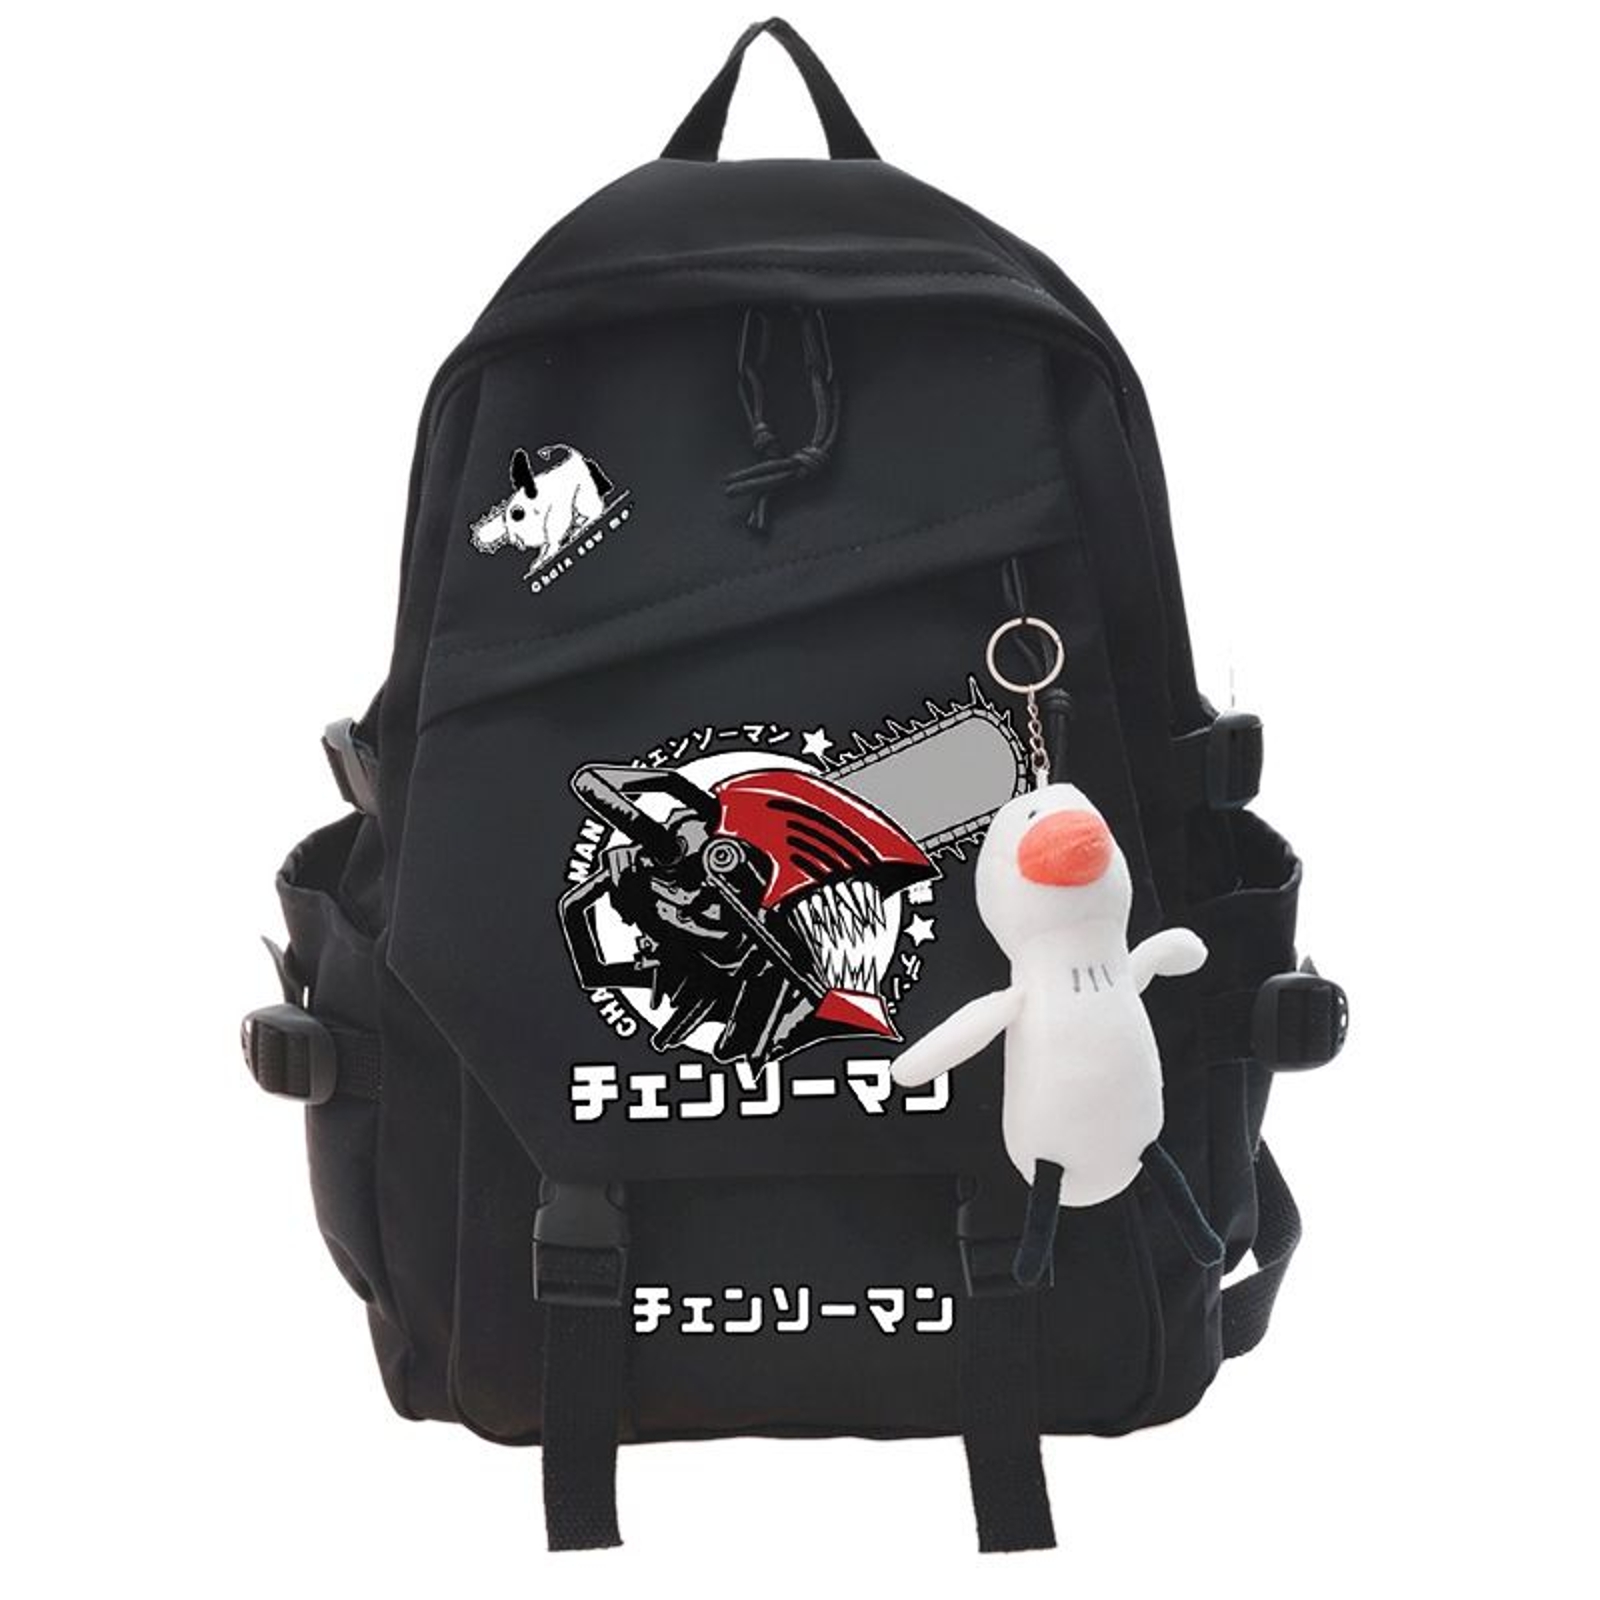 Chainsaw Man Black Backpack - $59.99 - The Mad Shop